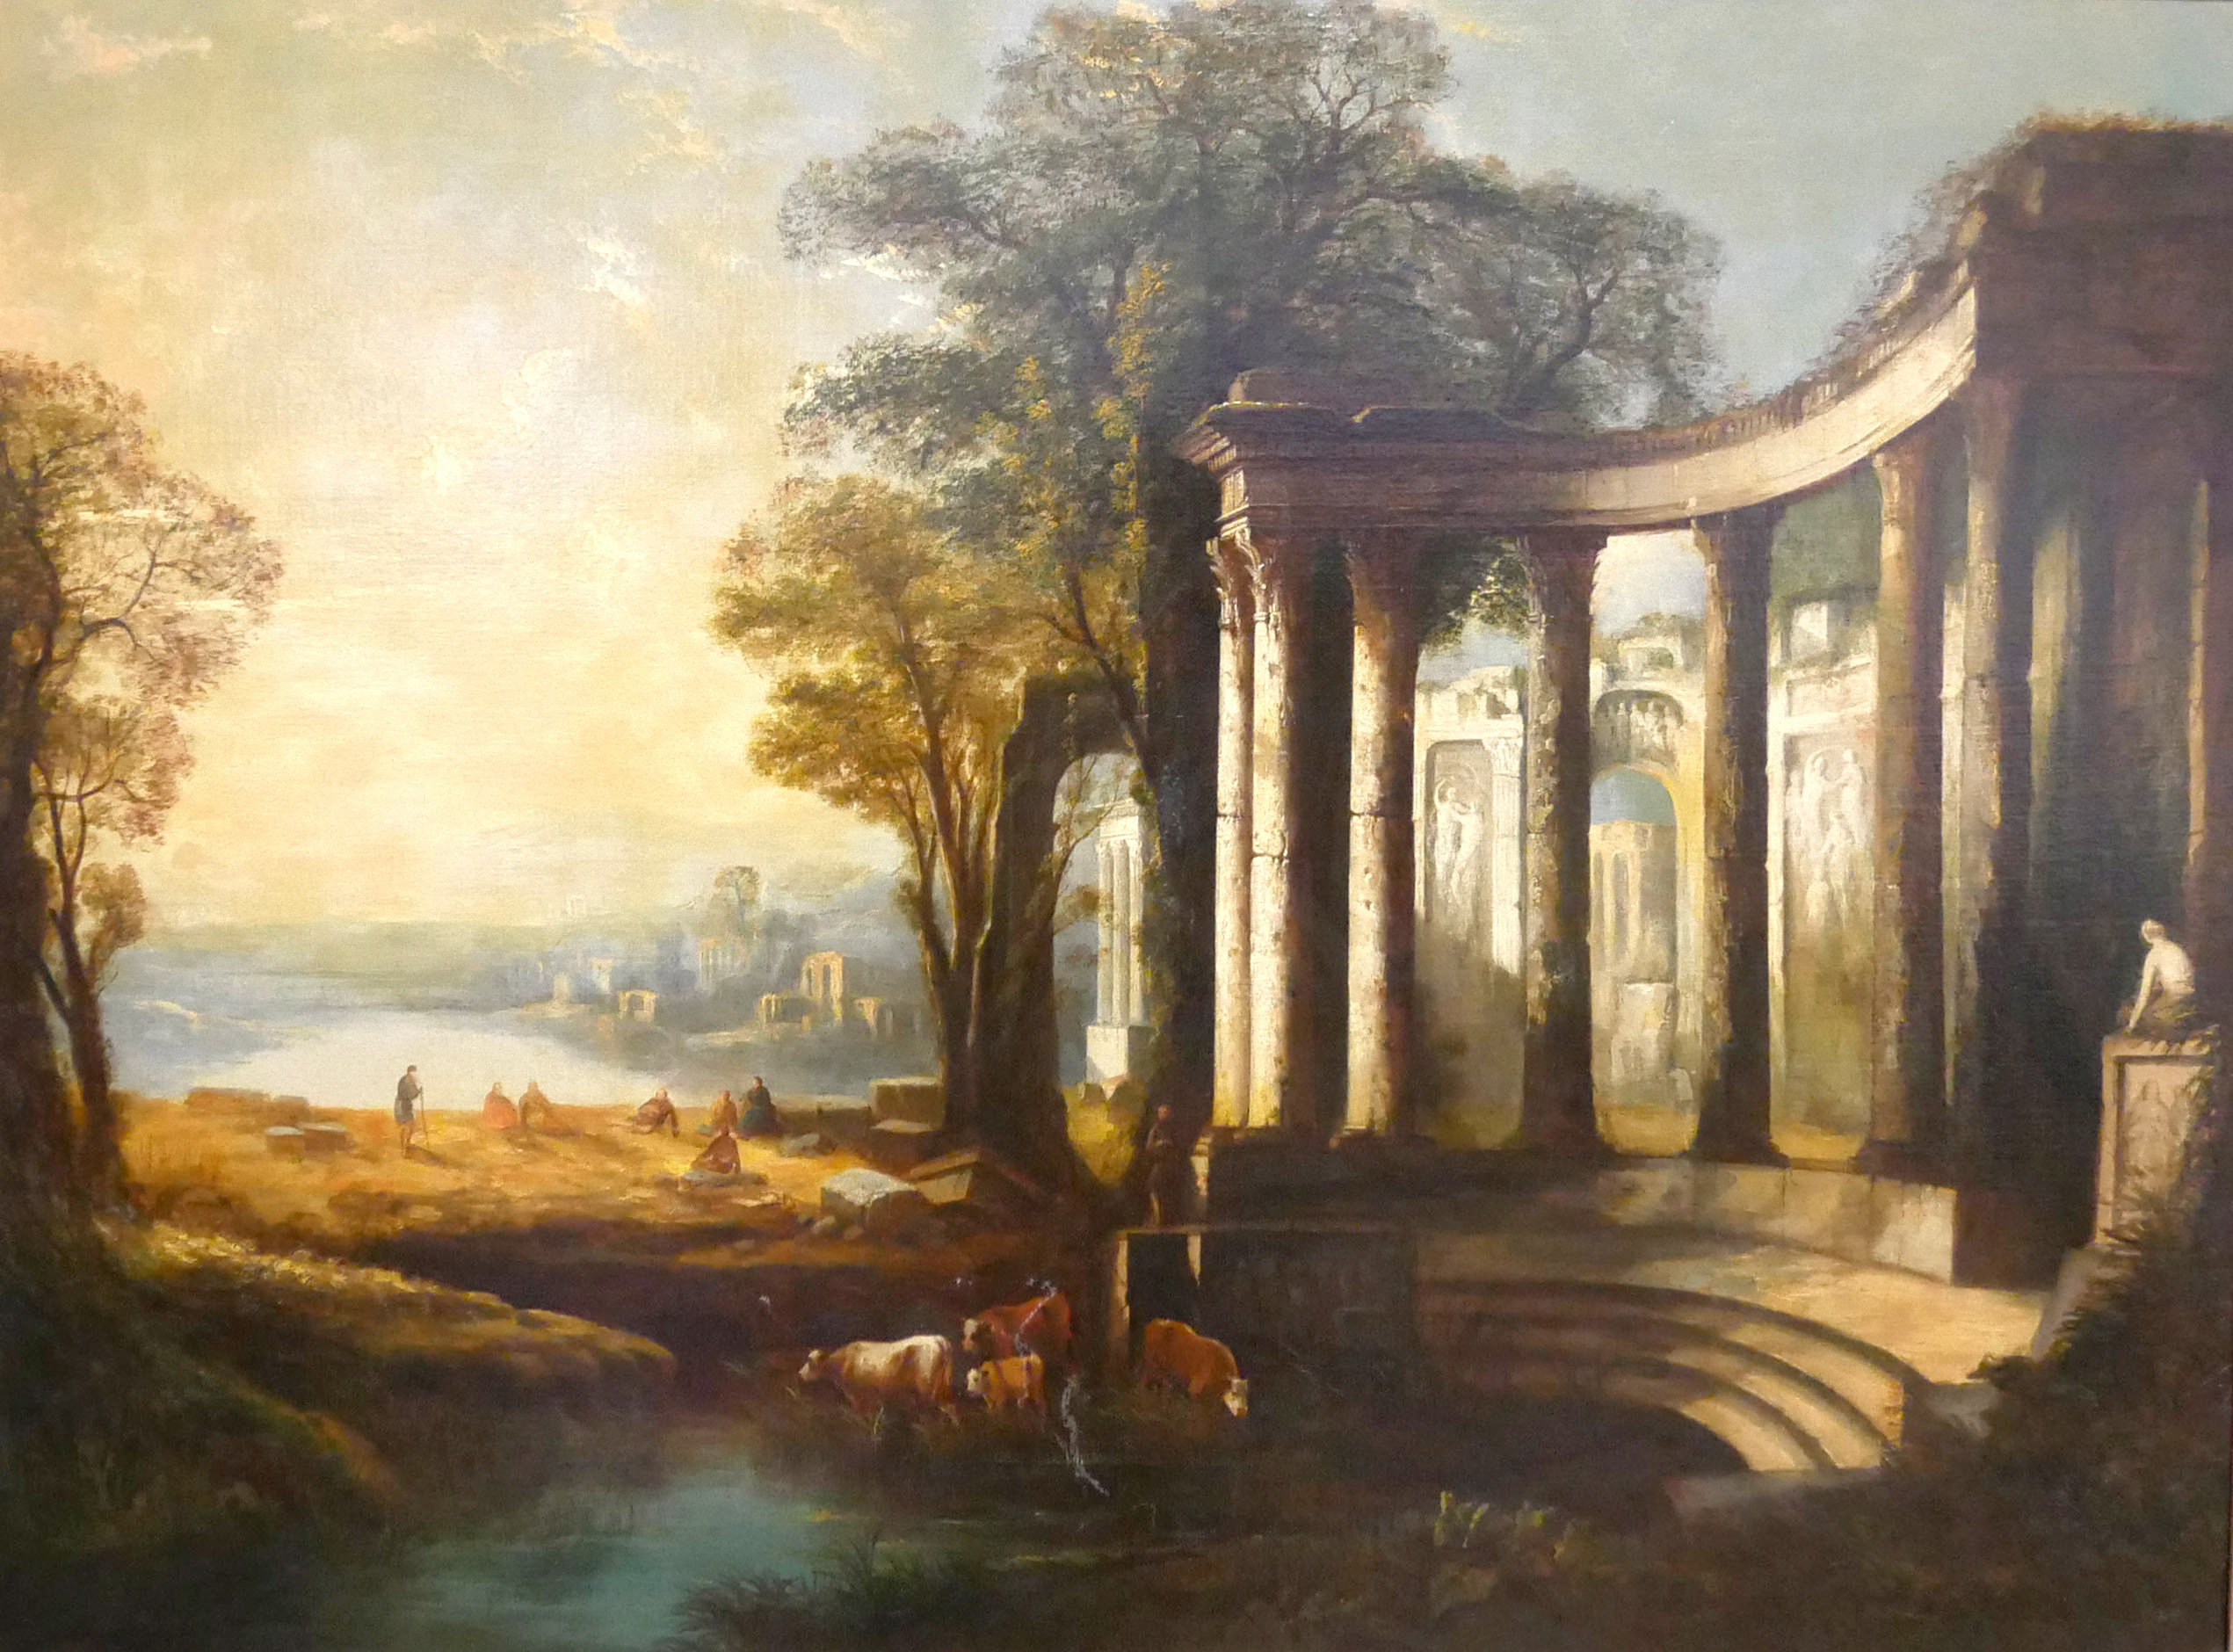 A LARGE 18TH CENTURY OIL ON CANVAS, CLASSICAL ITALIAN RIVER RUIN Landscape, figures, cattle and city - Image 3 of 9